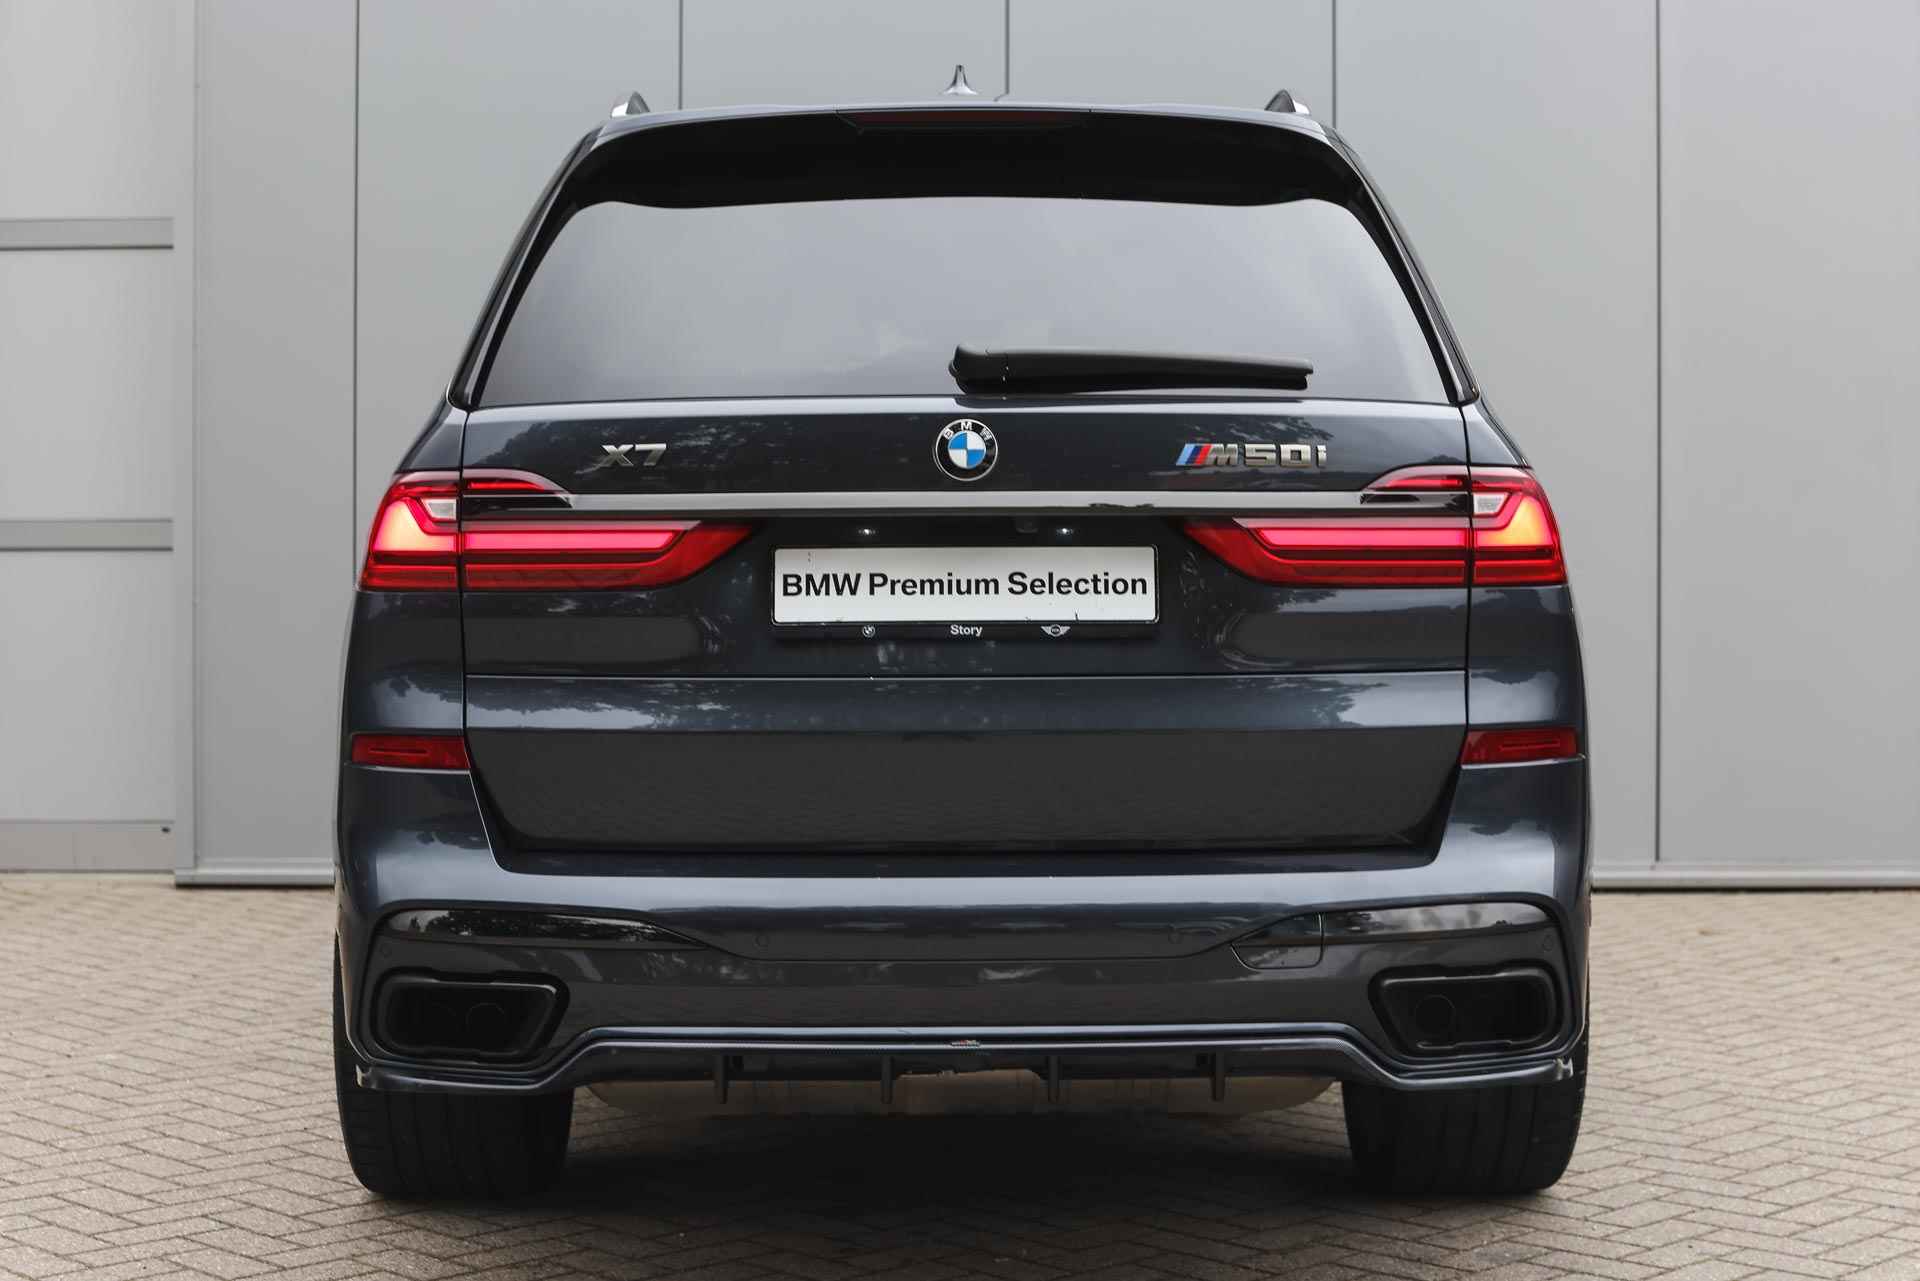 BMW X7 M50i High Executive Automaat / Active Steering / Stoelventilatie / Laserlight / Soft Close / Head-Up / Gesture Control / Parking Assistant Plus / Alpina wielen 23 inch - 8/56